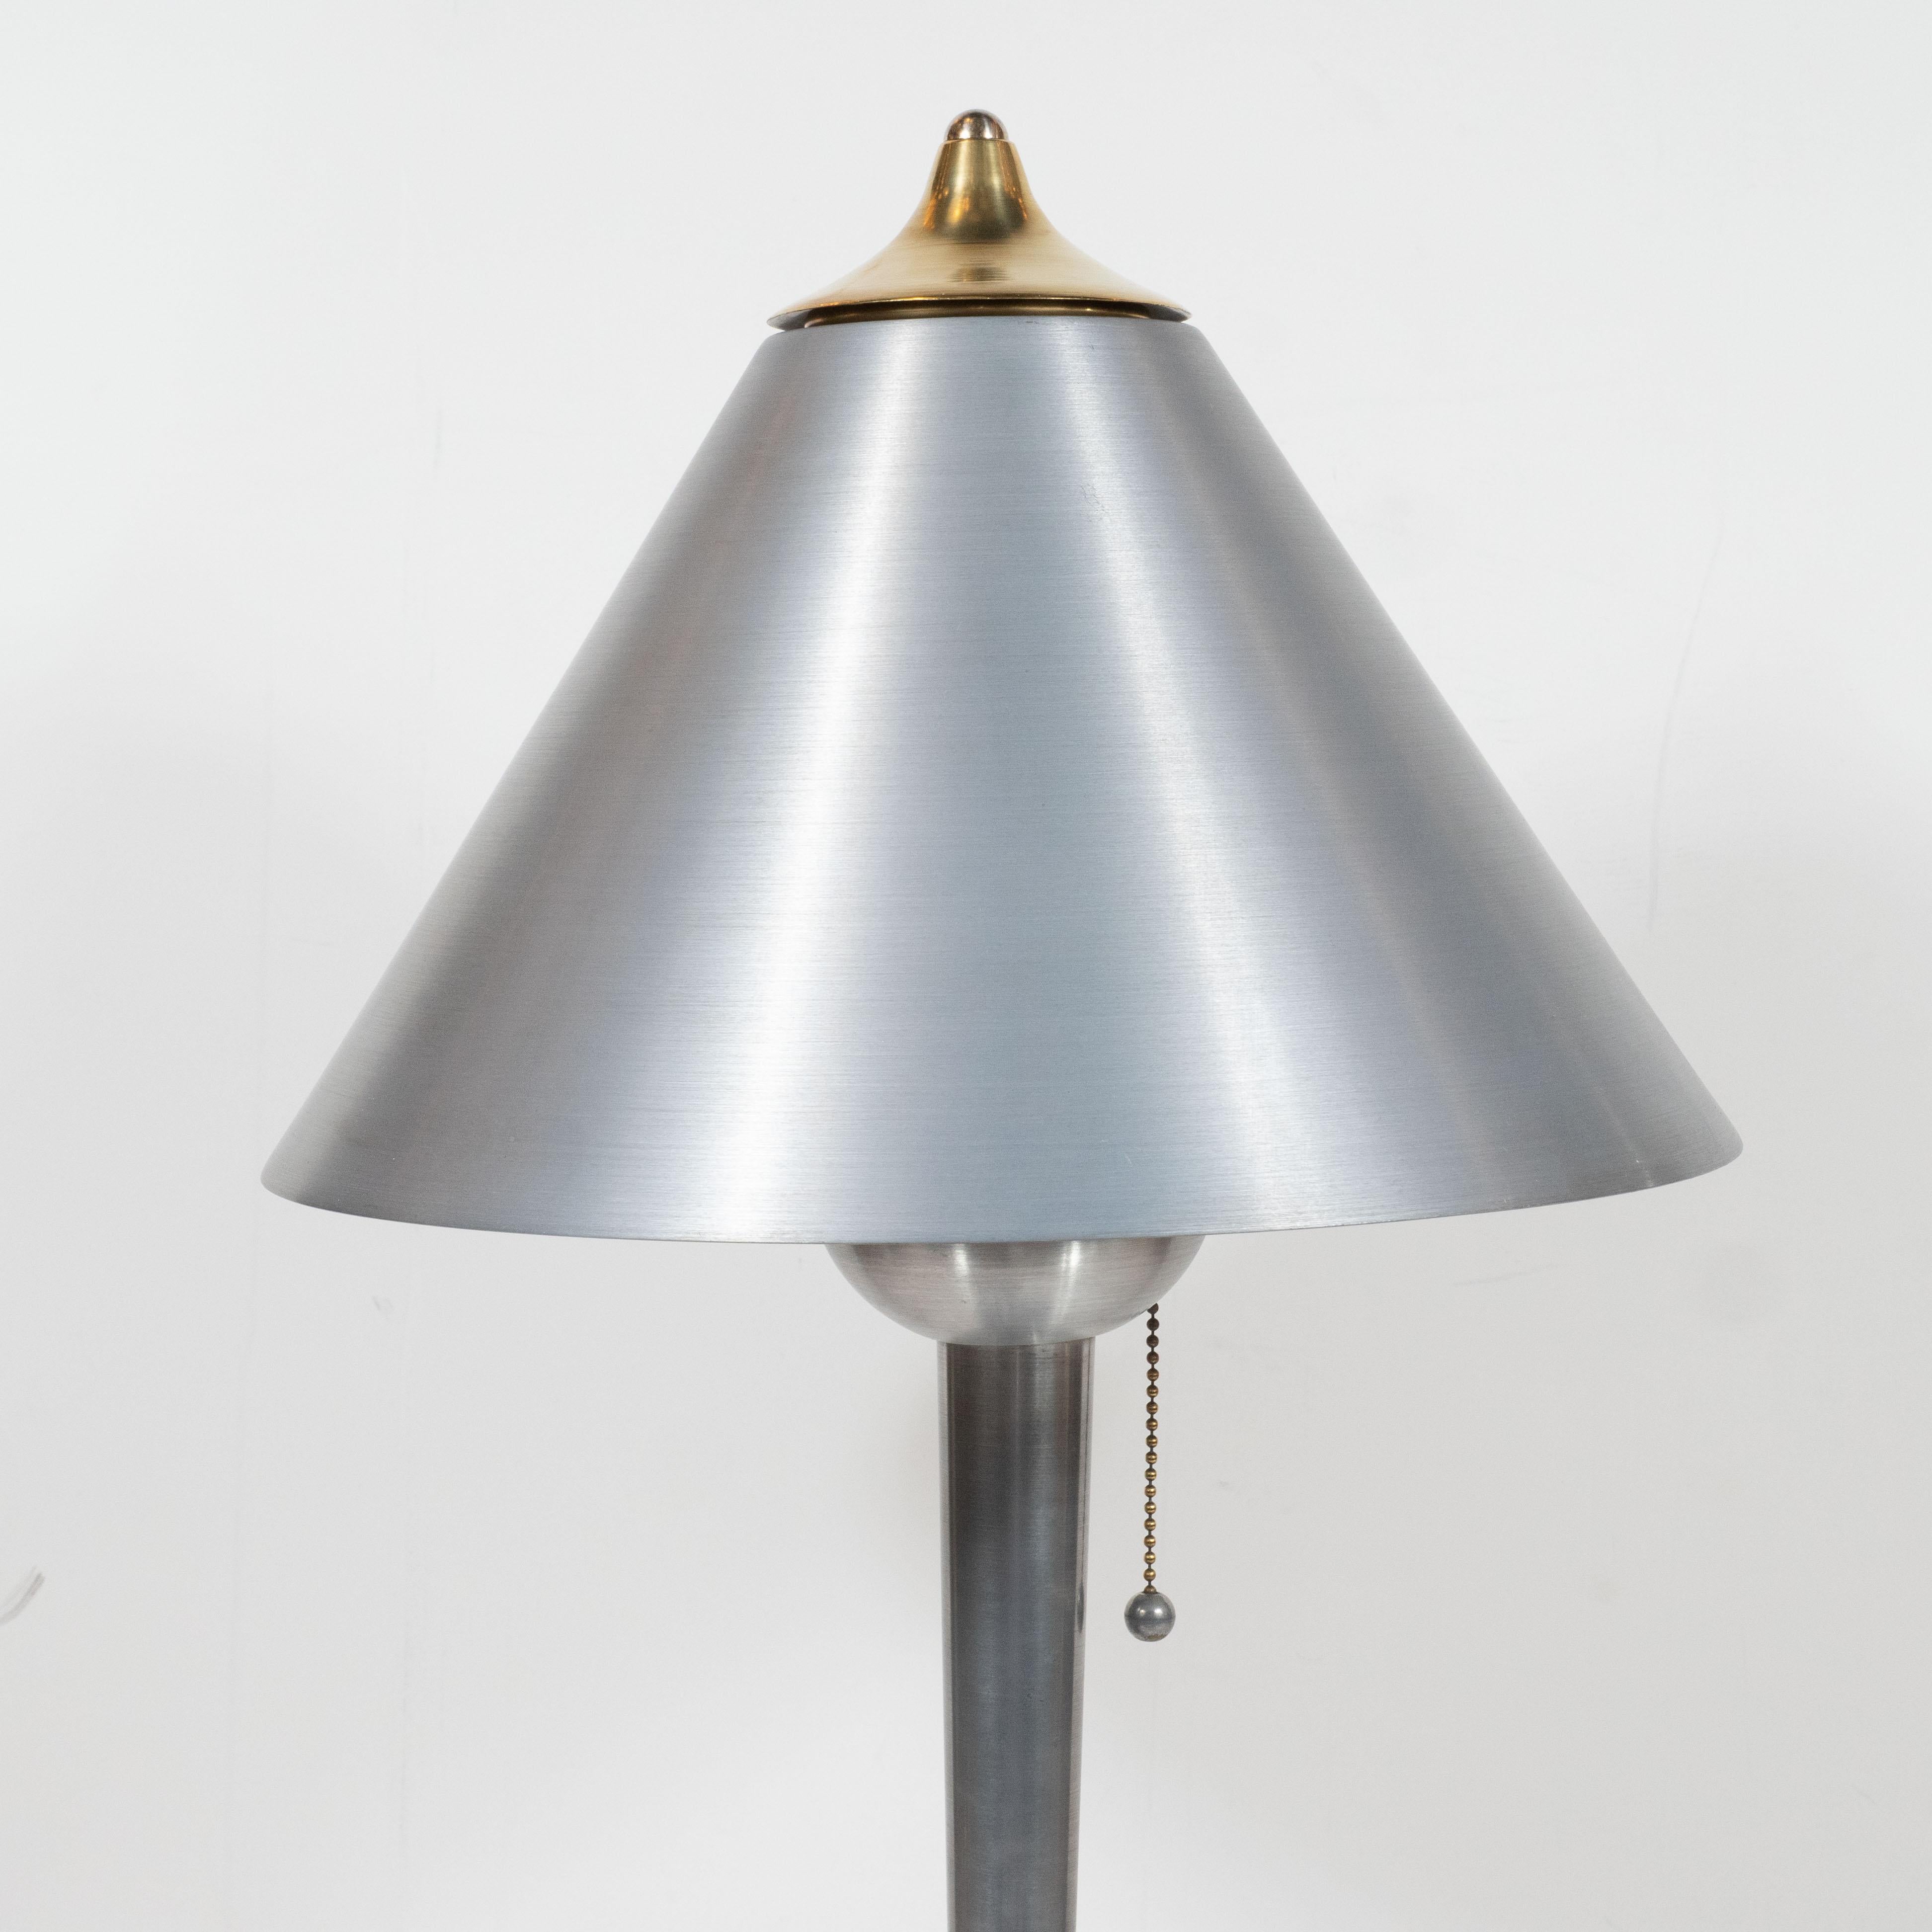 This sophisticated Art Deco Machine Age table lamp was realized in the United States, circa 1935. They feature a skyscraper style two-tiered brushed aluminum base from which a cylindrical body- flaring subtly to its apex- ascends. The body